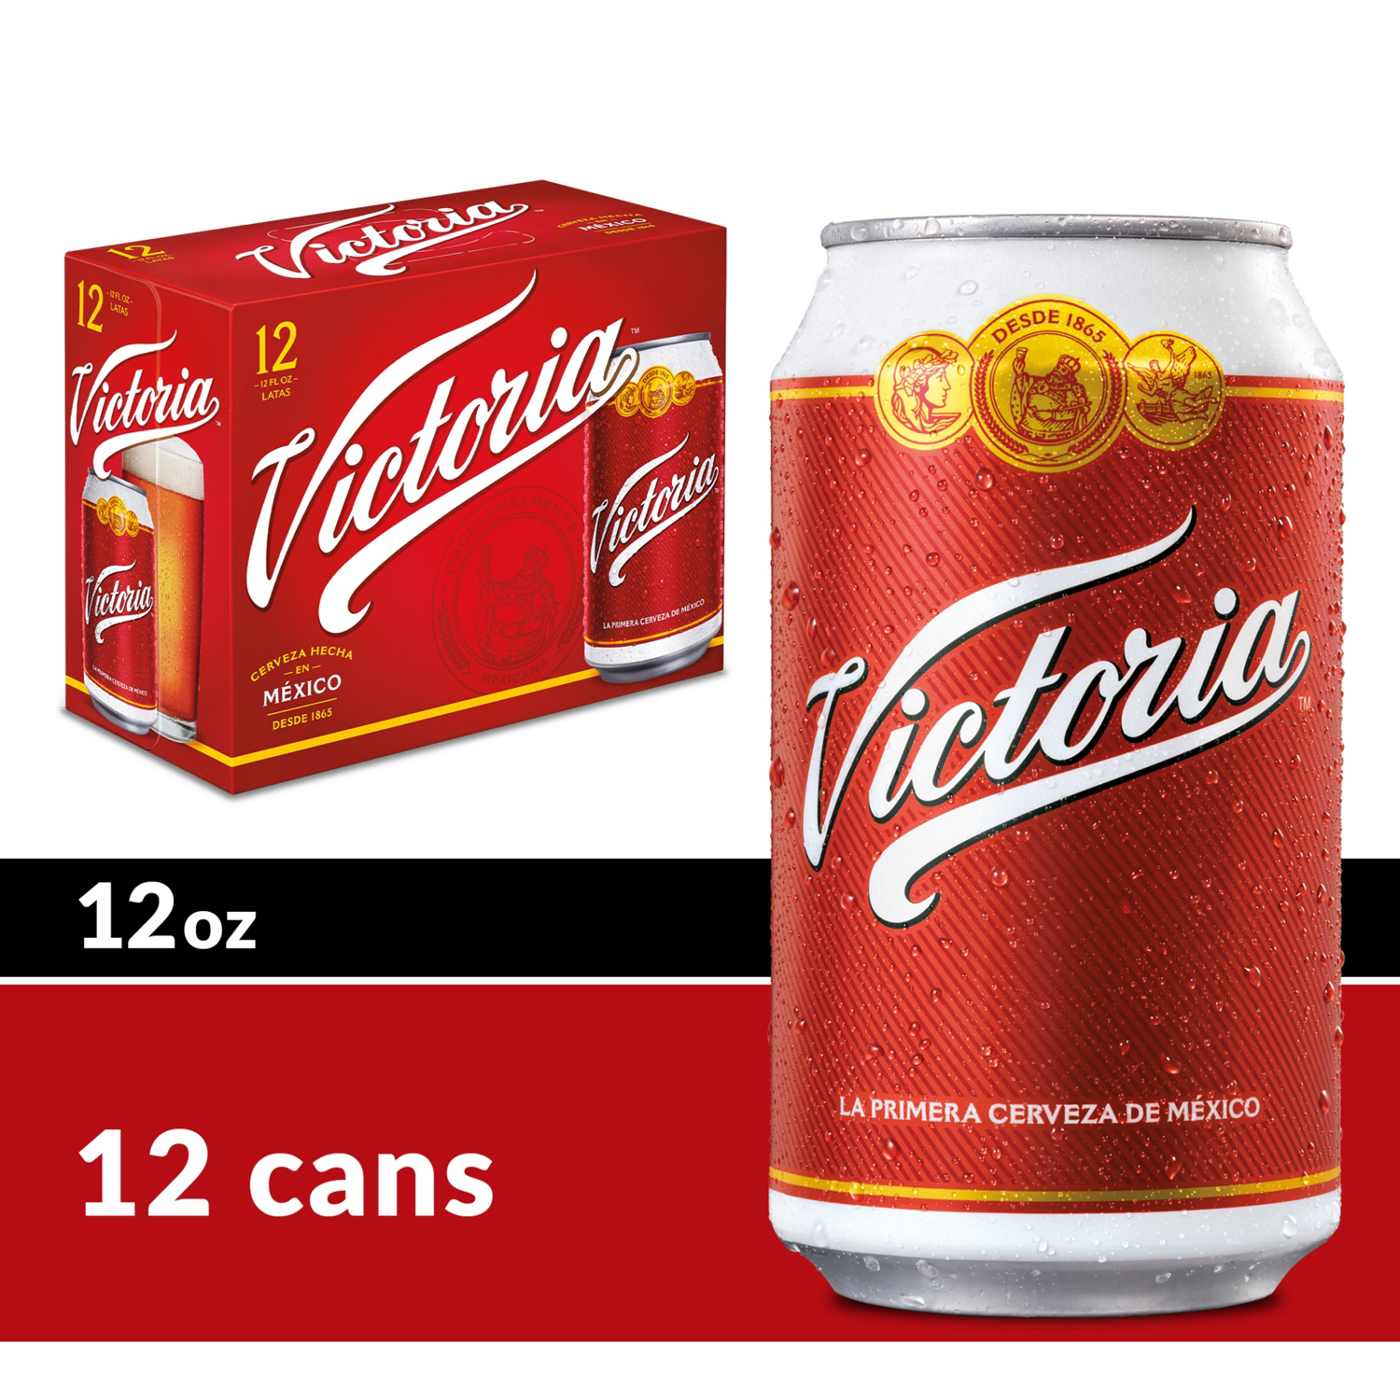 Victoria Amber Lager Mexican Beer 12 oz Cans, 12 pk; image 6 of 8